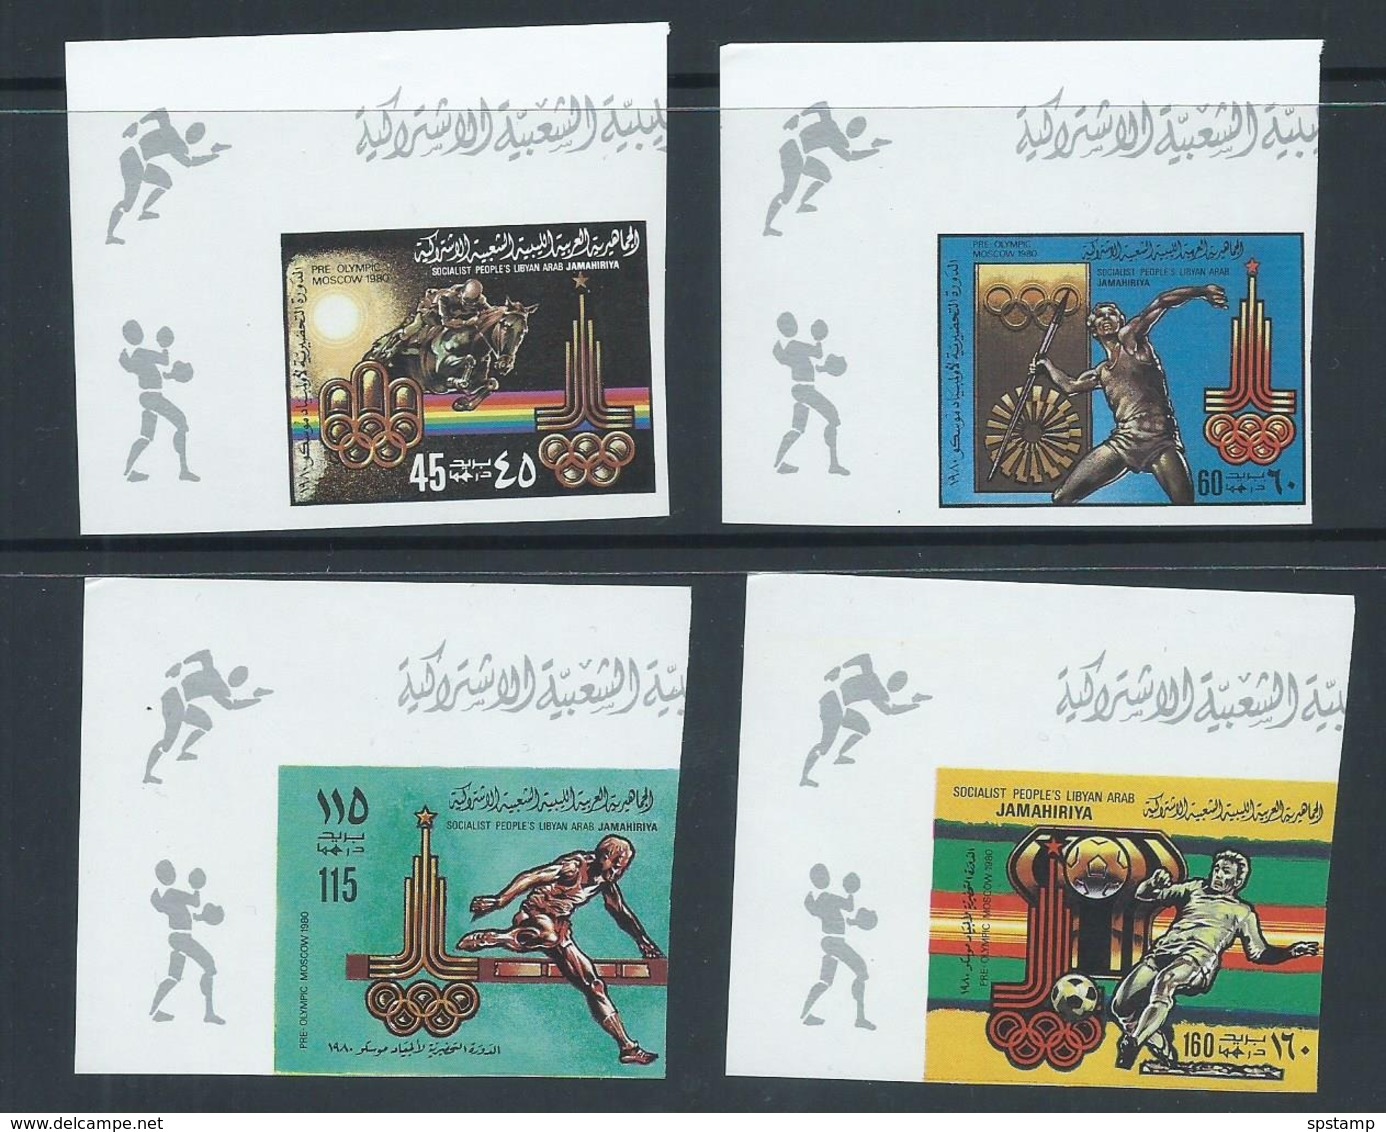 Libya 1979 Moscow Olympic Games Imperforate Set Of 4 Wide Margins MNH - Libya